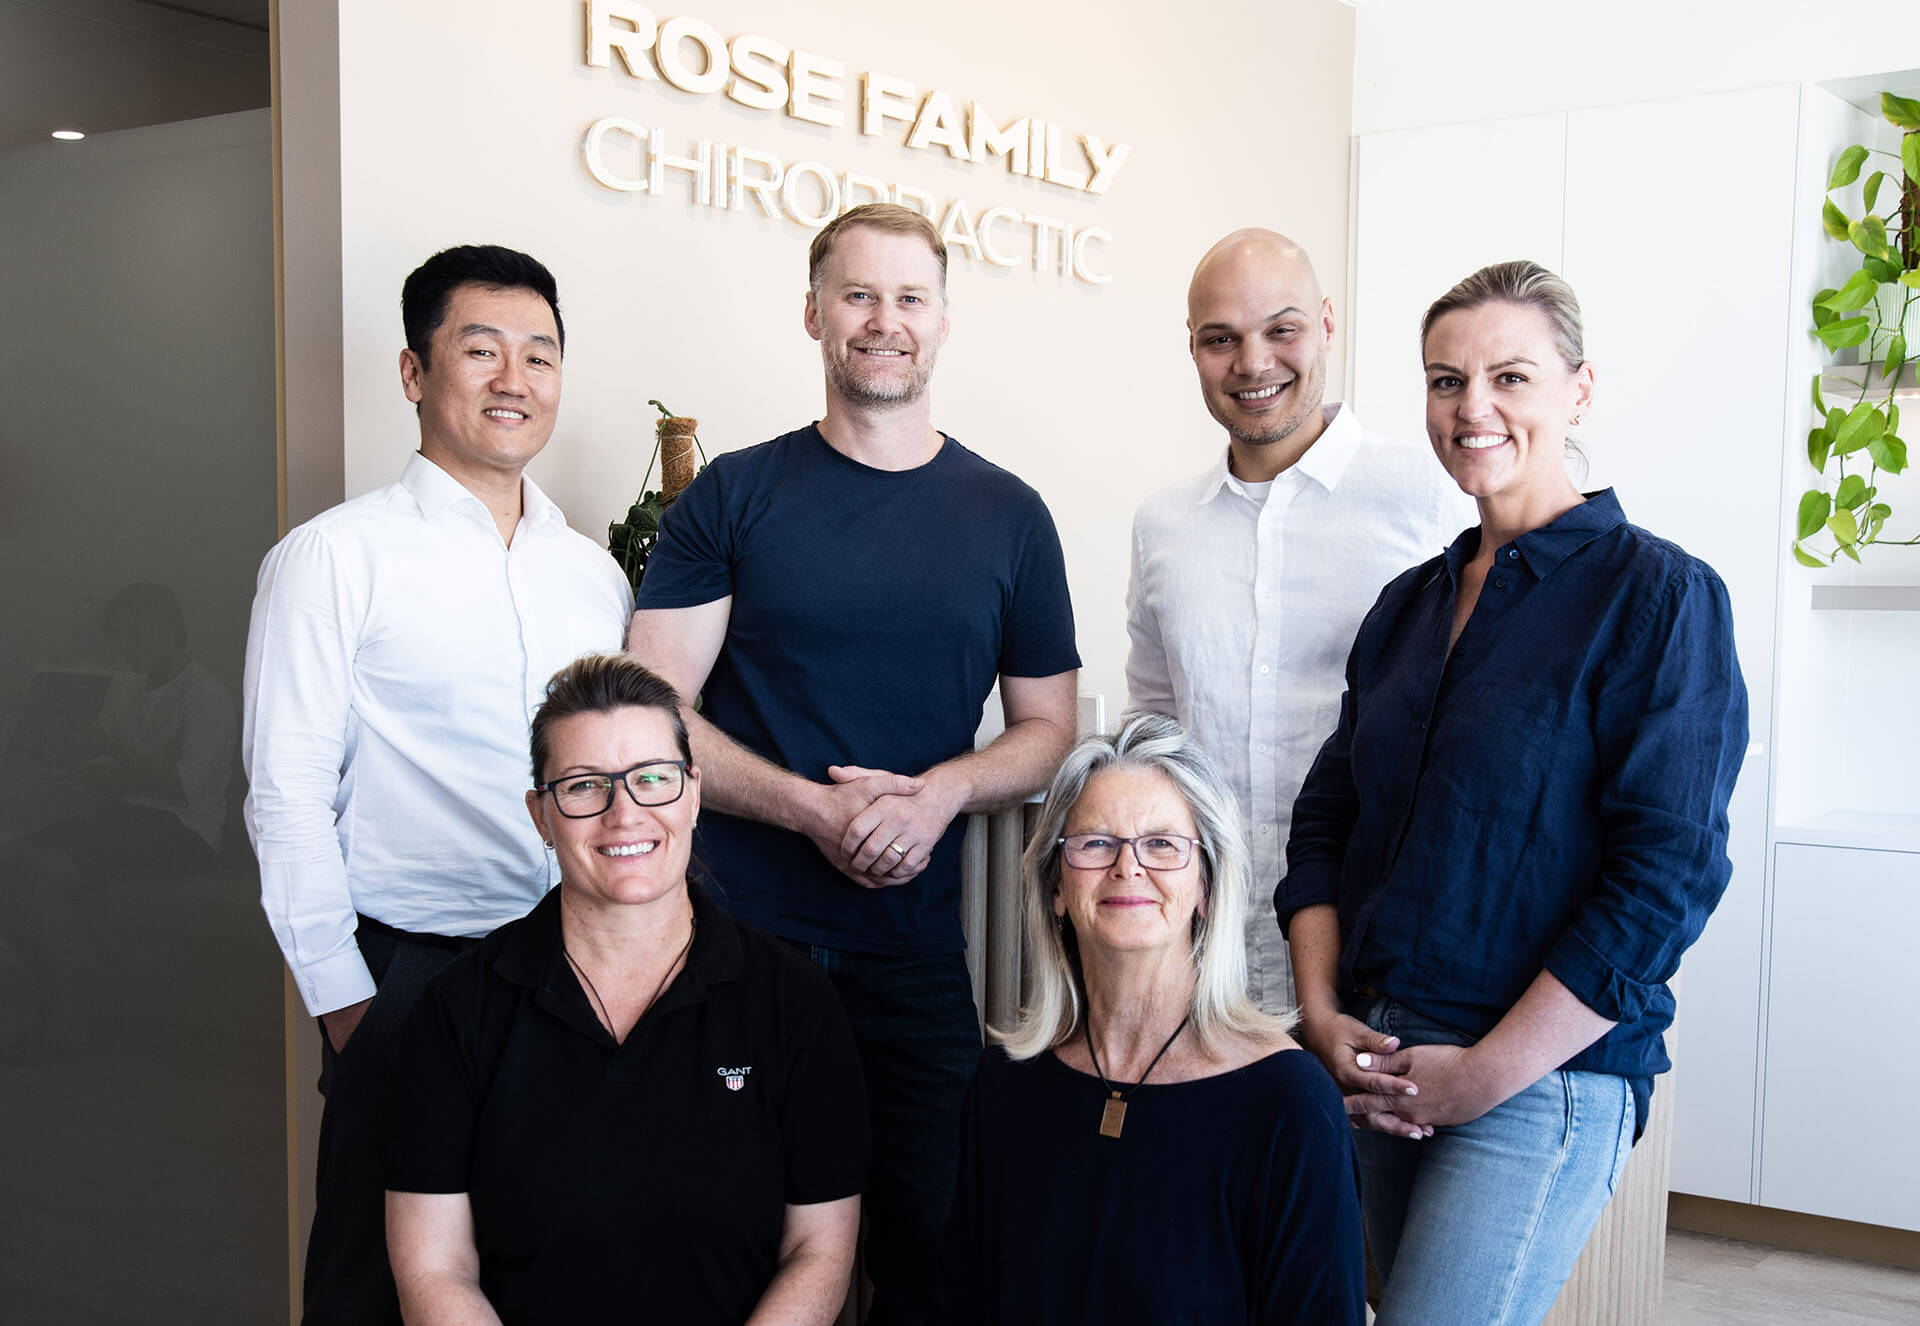 about-rose-family-chiro-group-photo